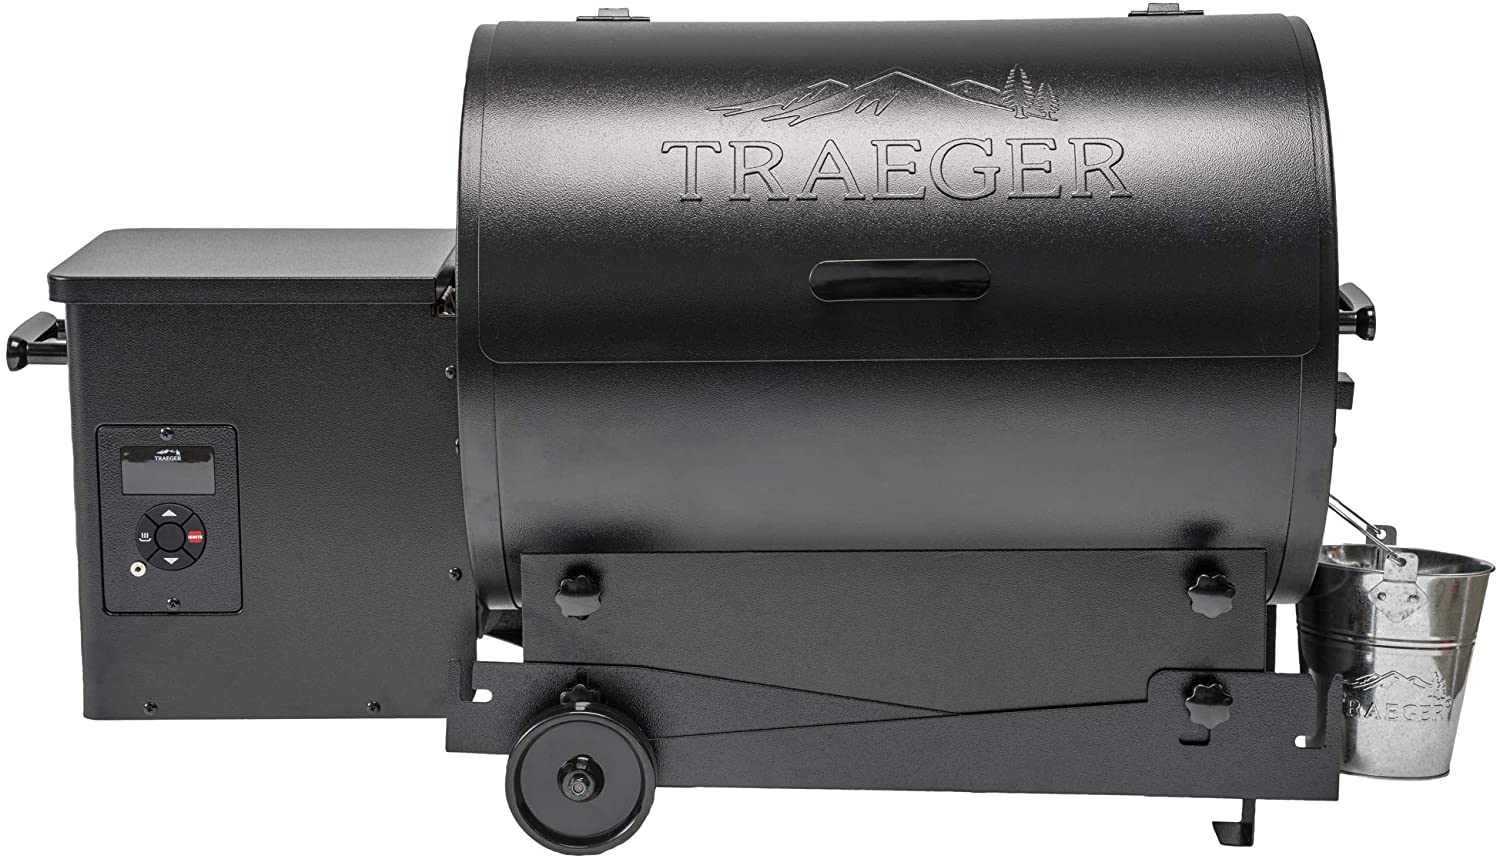 Traeger pellet smoker compared to an electric smoker